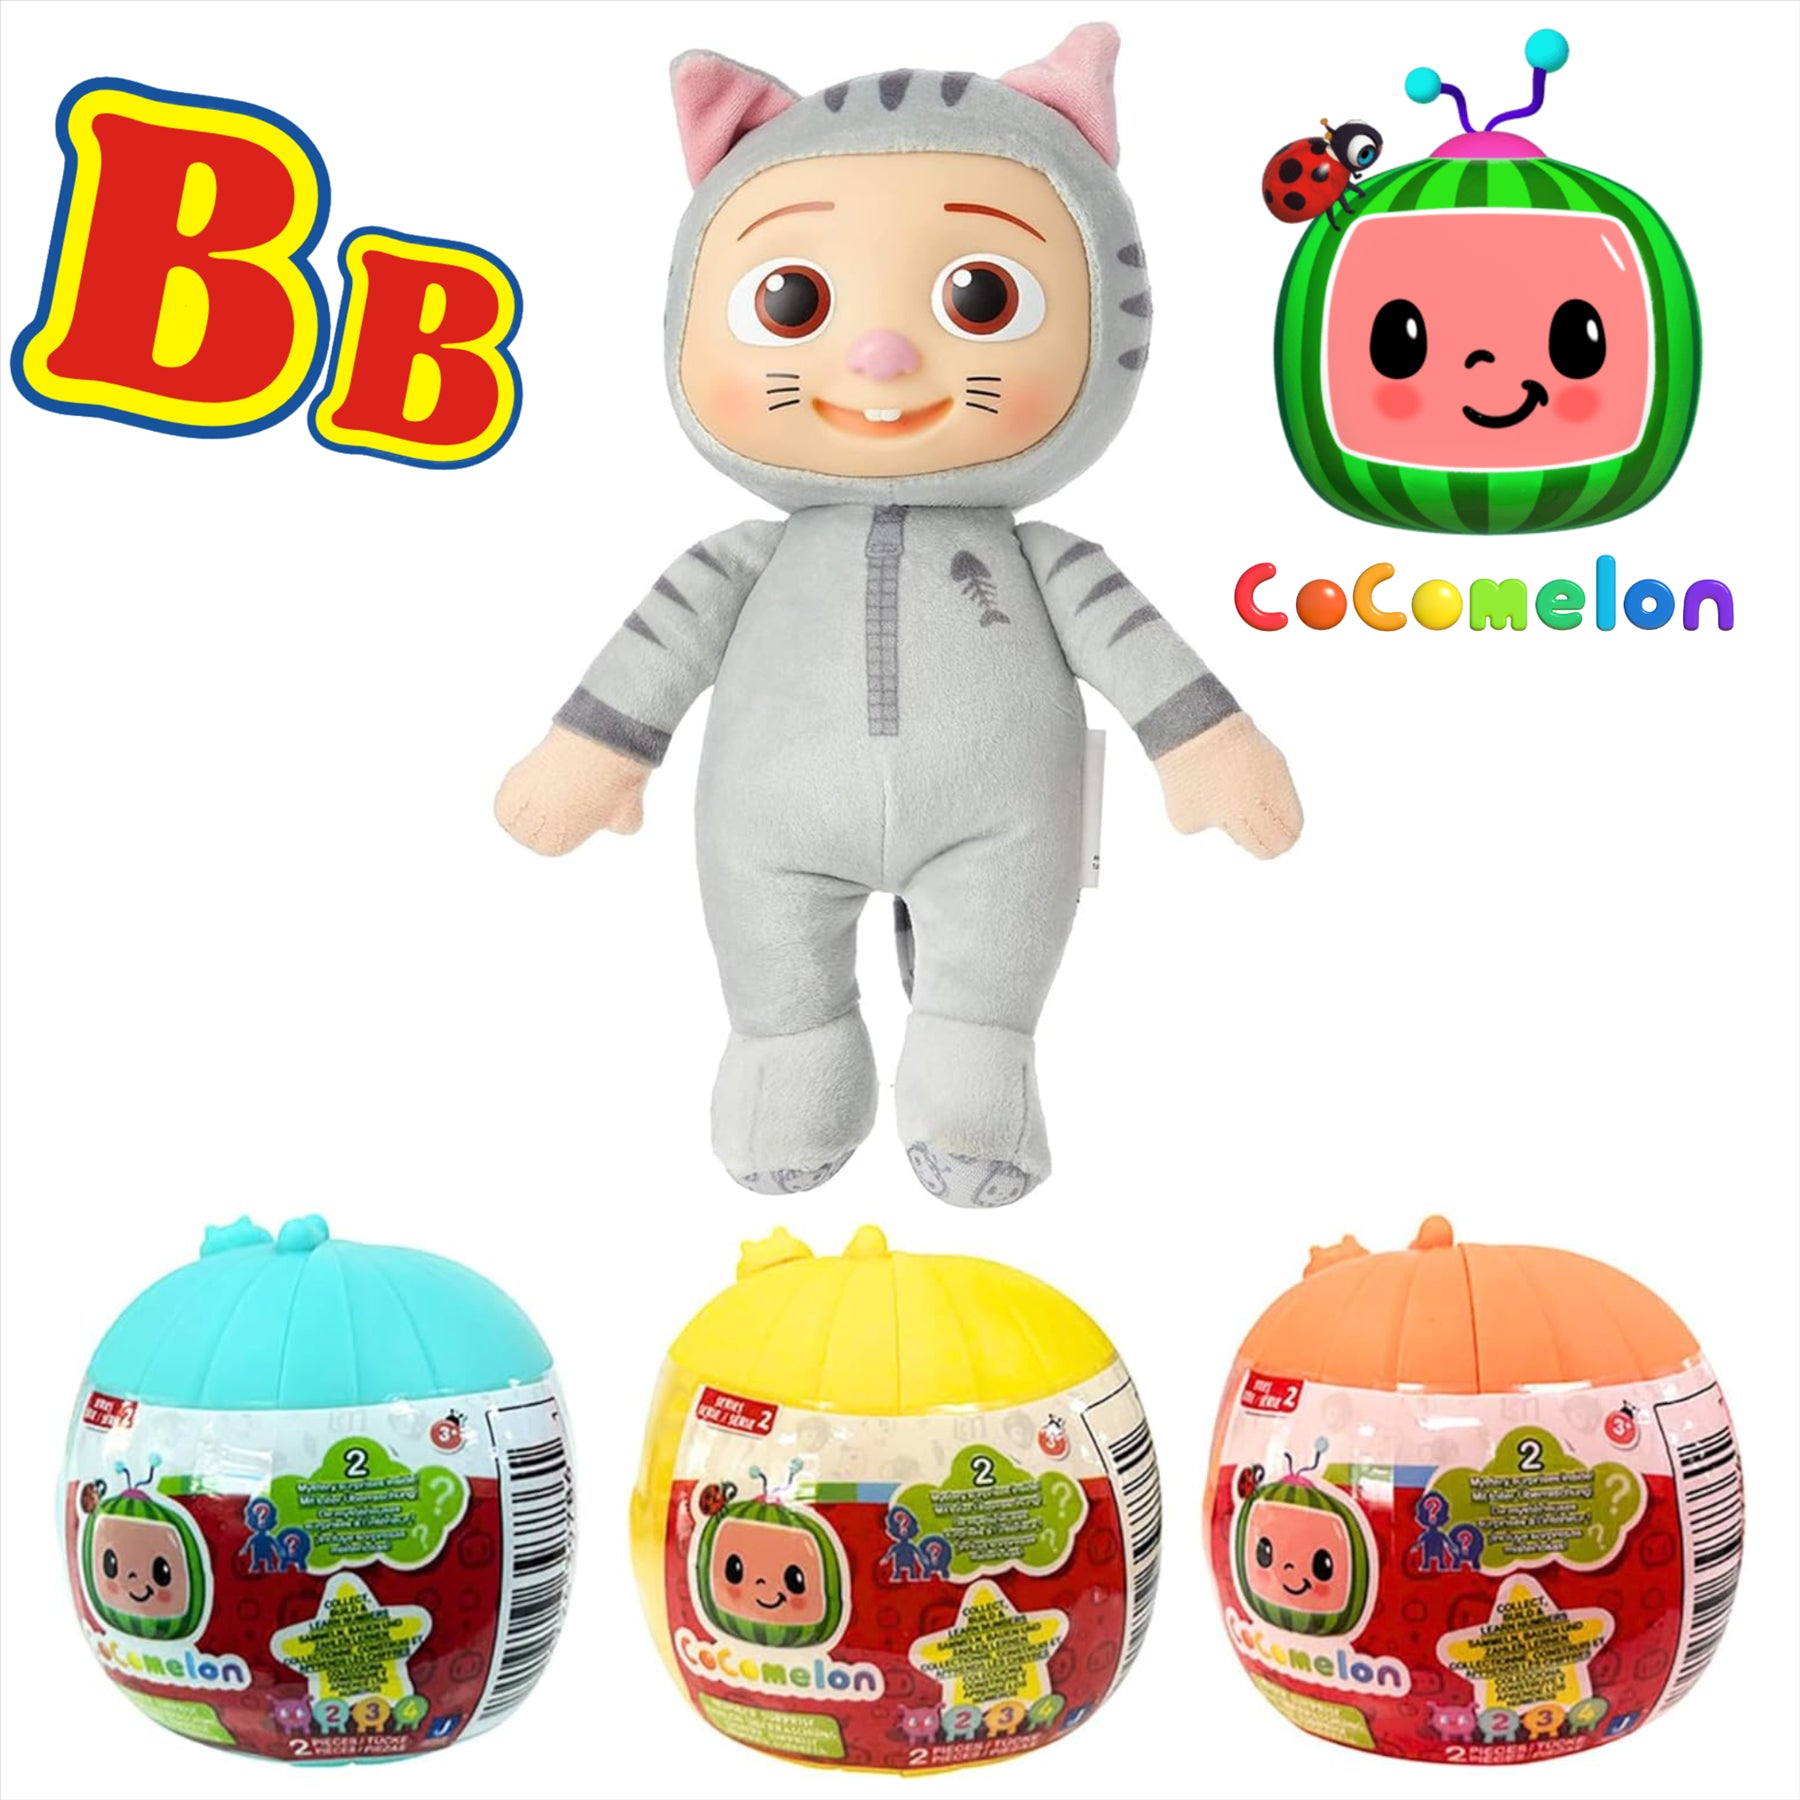 CoComelon Blind Capsule Number Character Articulated Figure Set - Kitty 20cm Plush and 3x Balls - Toptoys2u